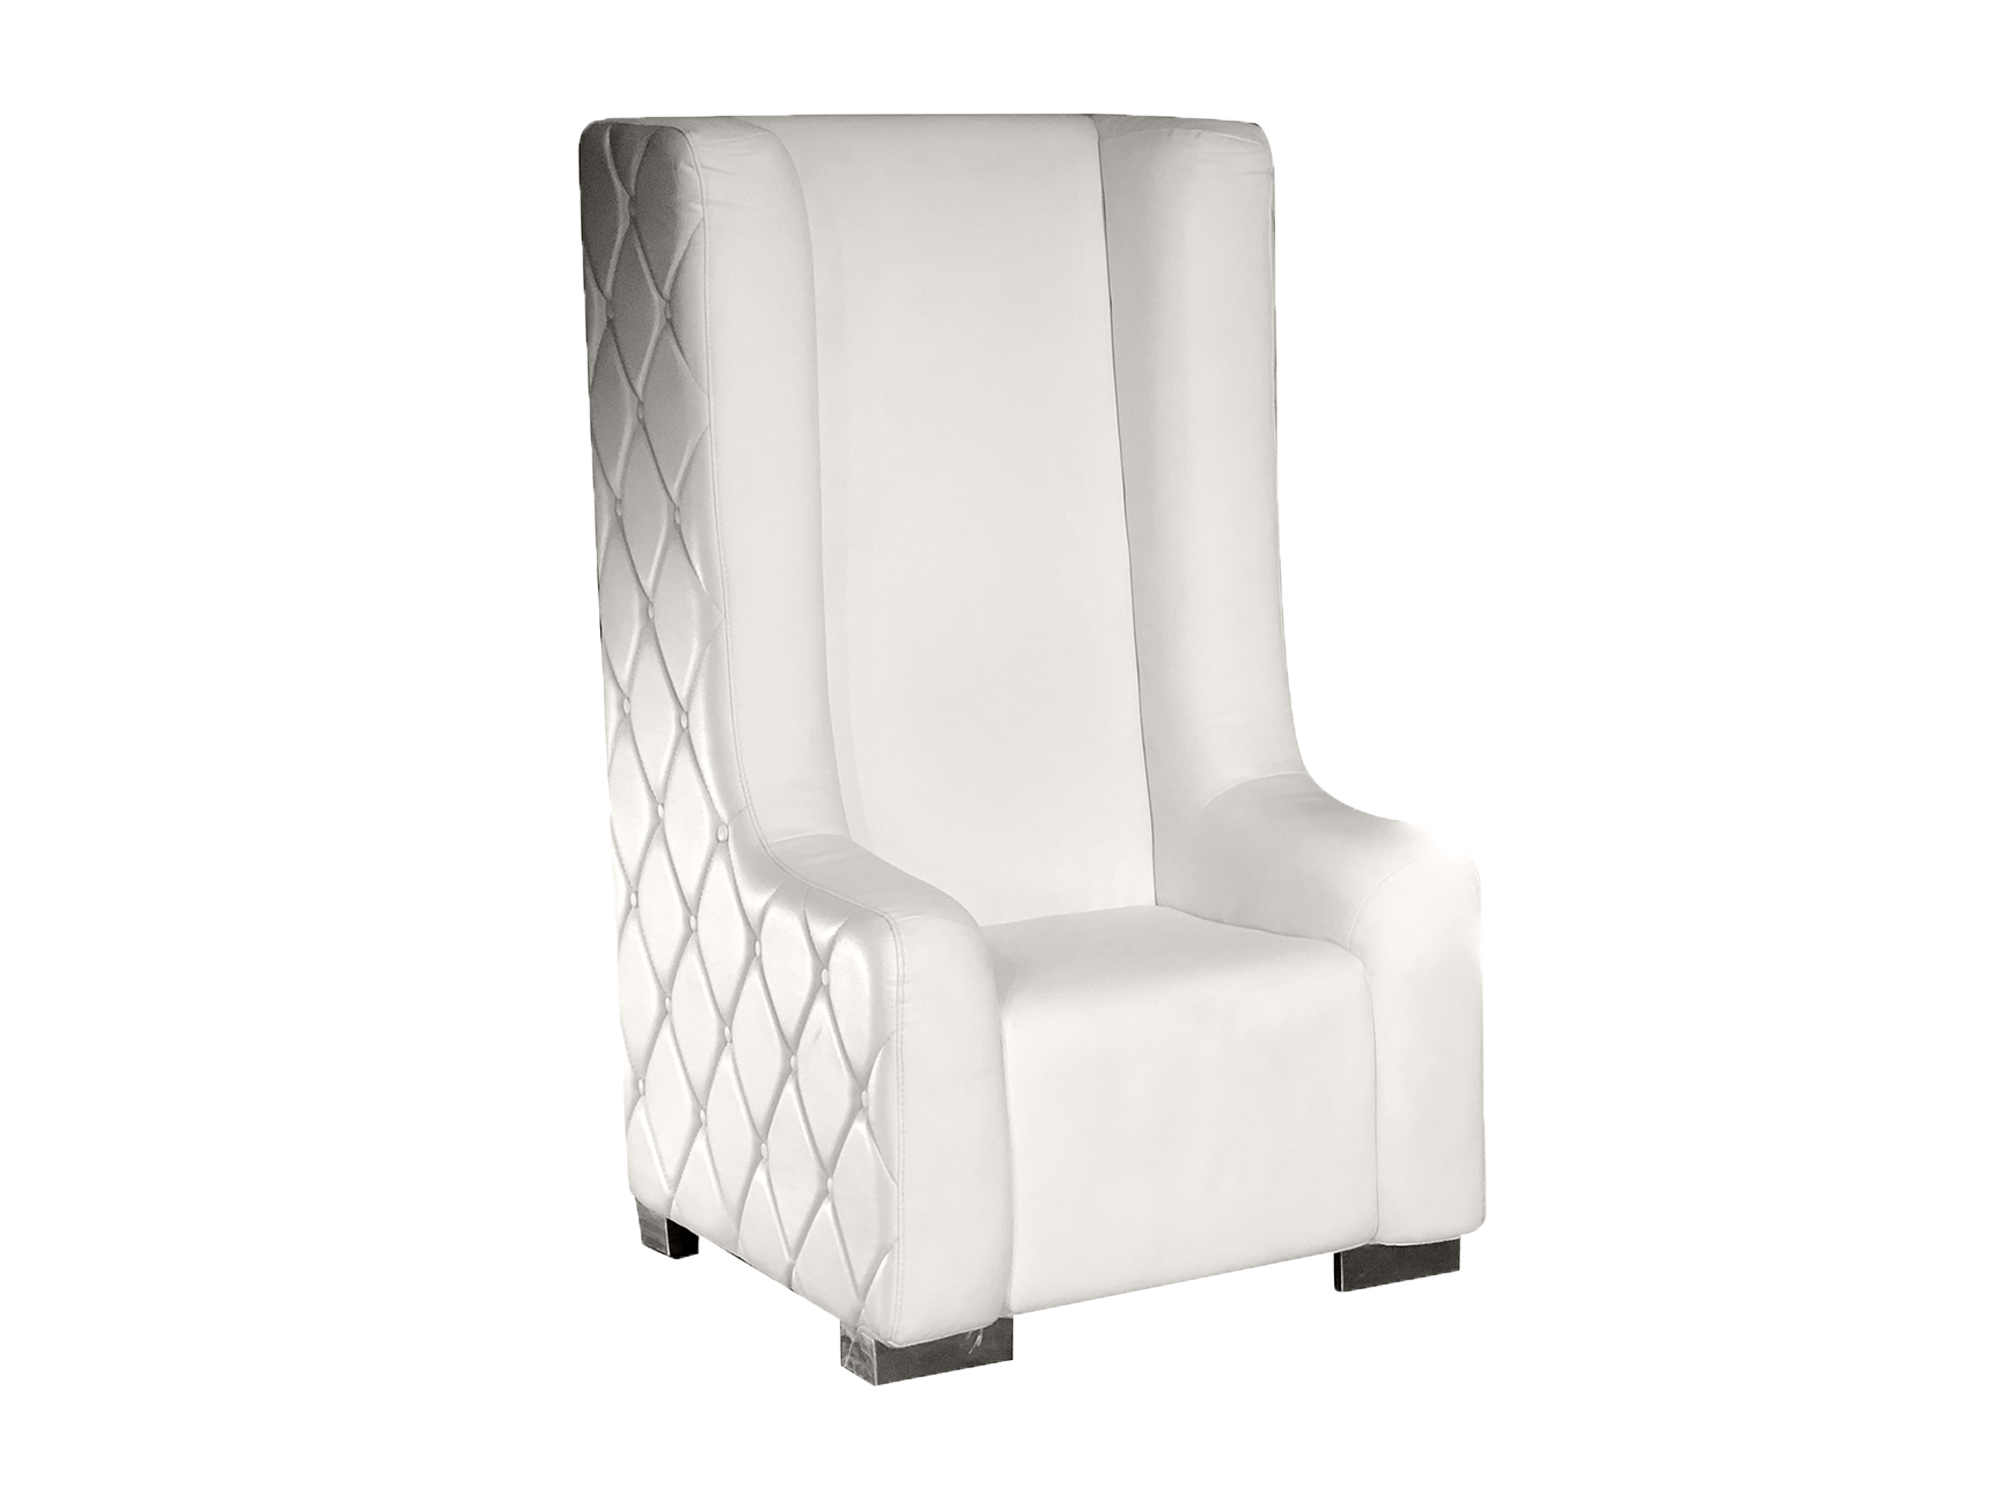 ROYALTY CLASSIC THRONE CHAIR - WHITE